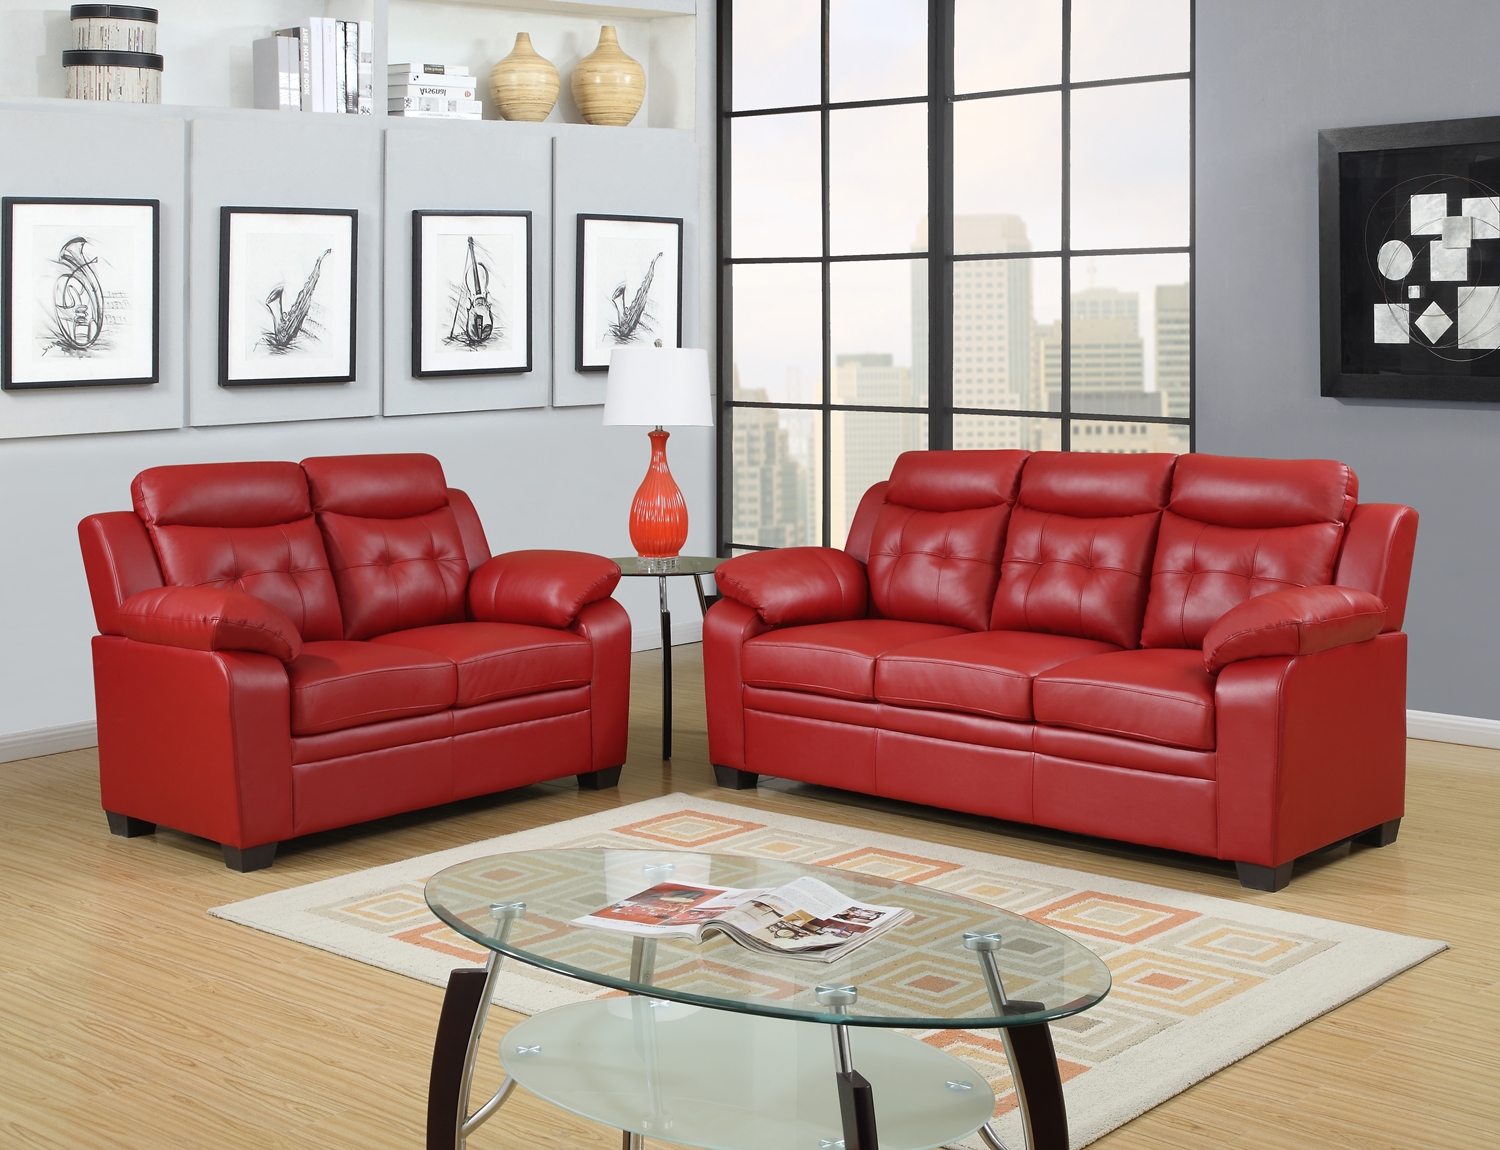 Simple Red Leather Sofa Decorating Ideas